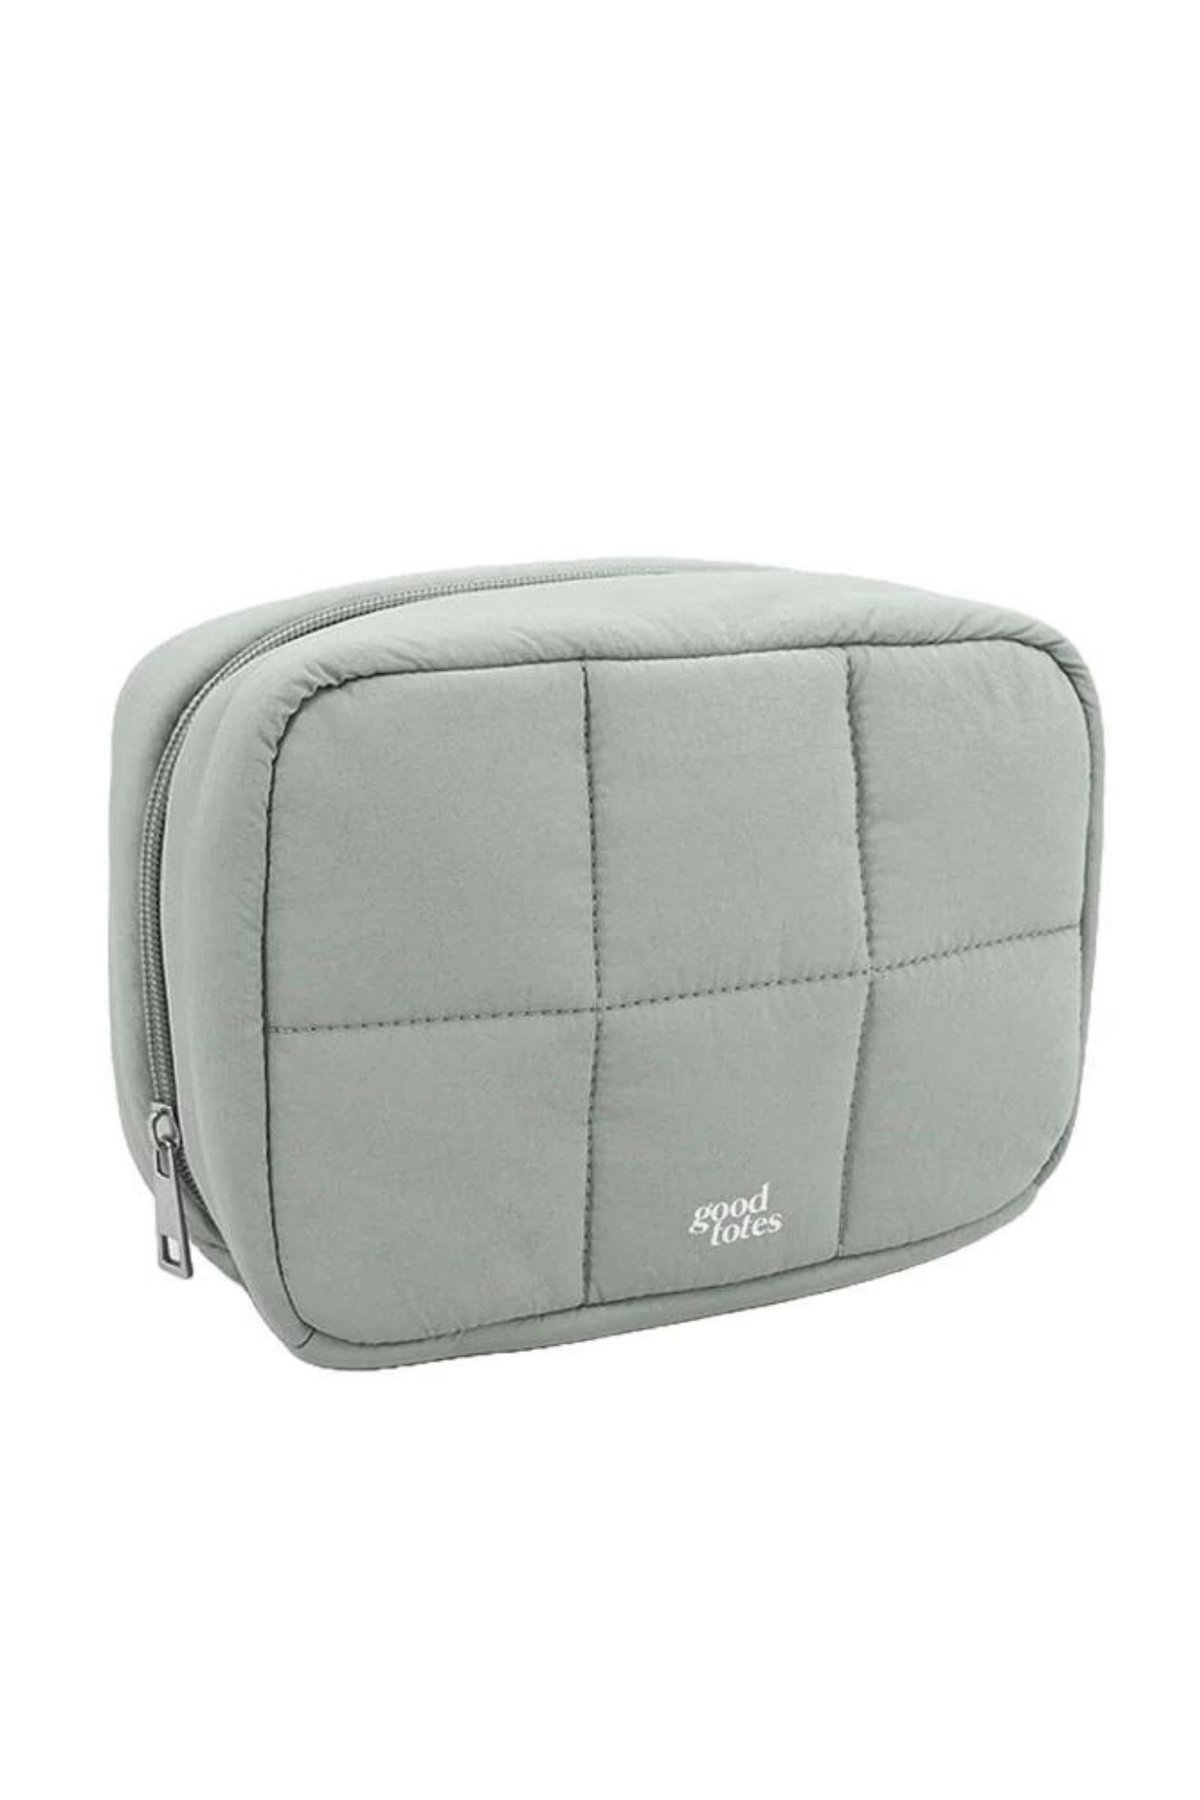 Good Totes (Jumbo Bread Puffer Pouch - Sage)